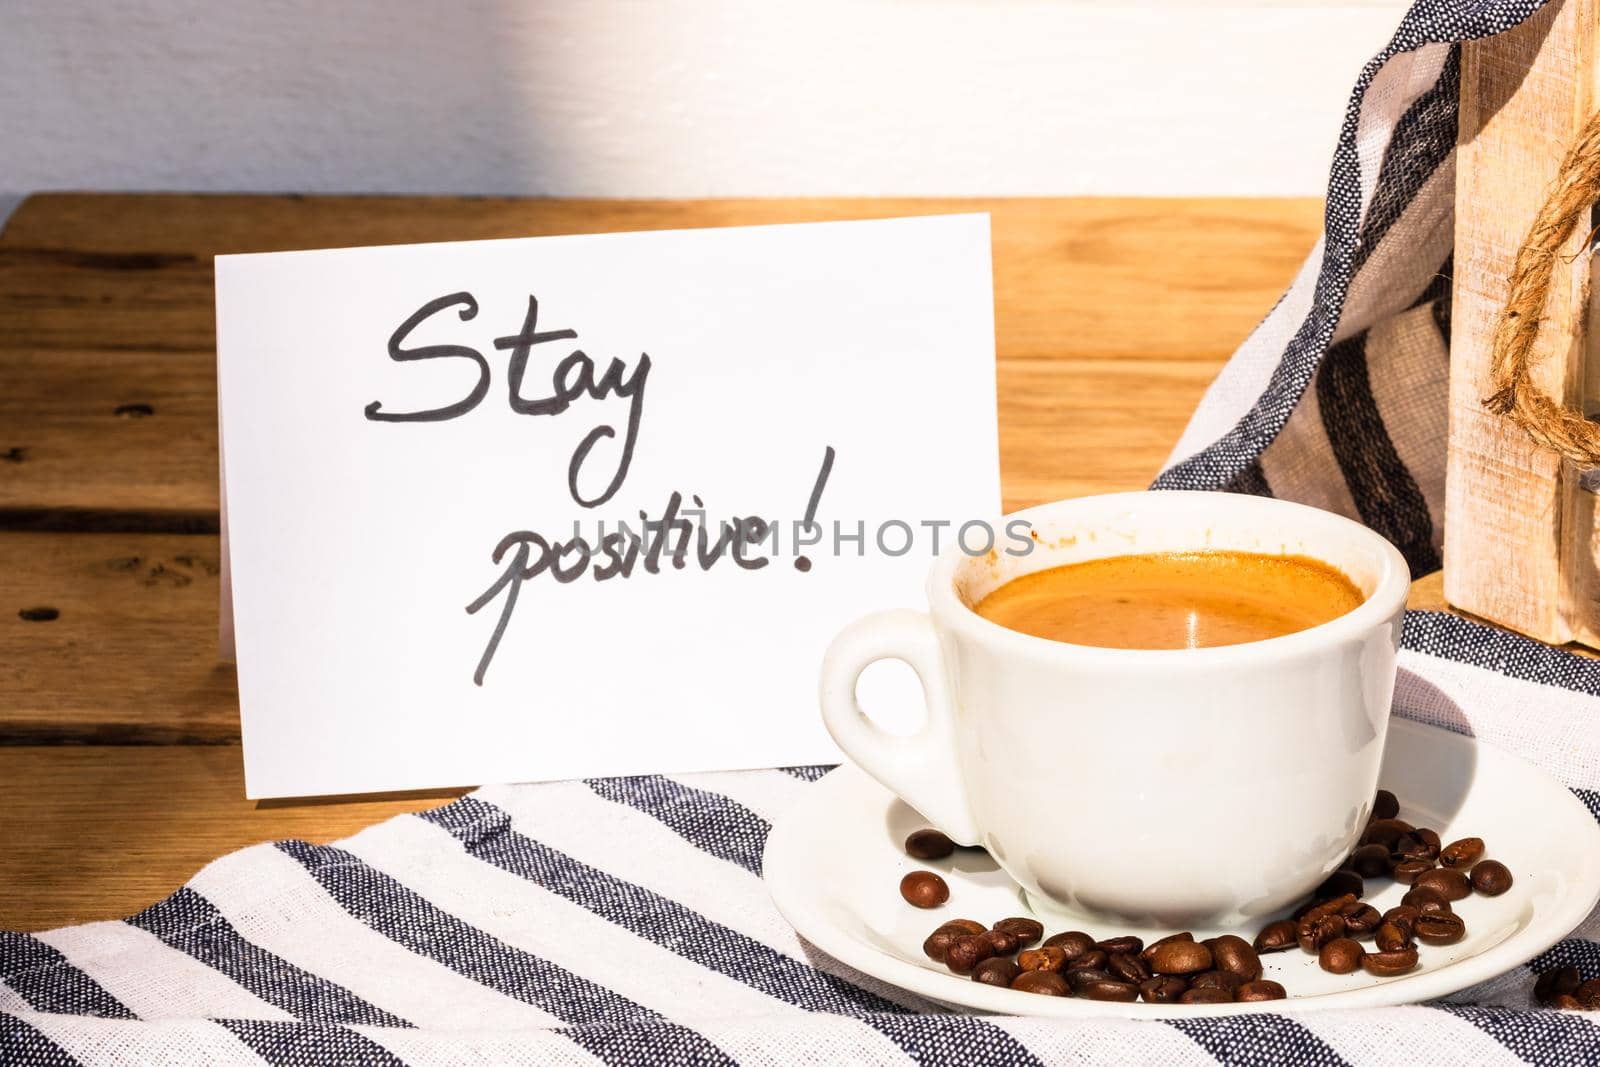 Coffee cup and buttered fresh French croissant on wooden crate. Food and breakfast concept. Morning message “stay positive” on white board by vladispas